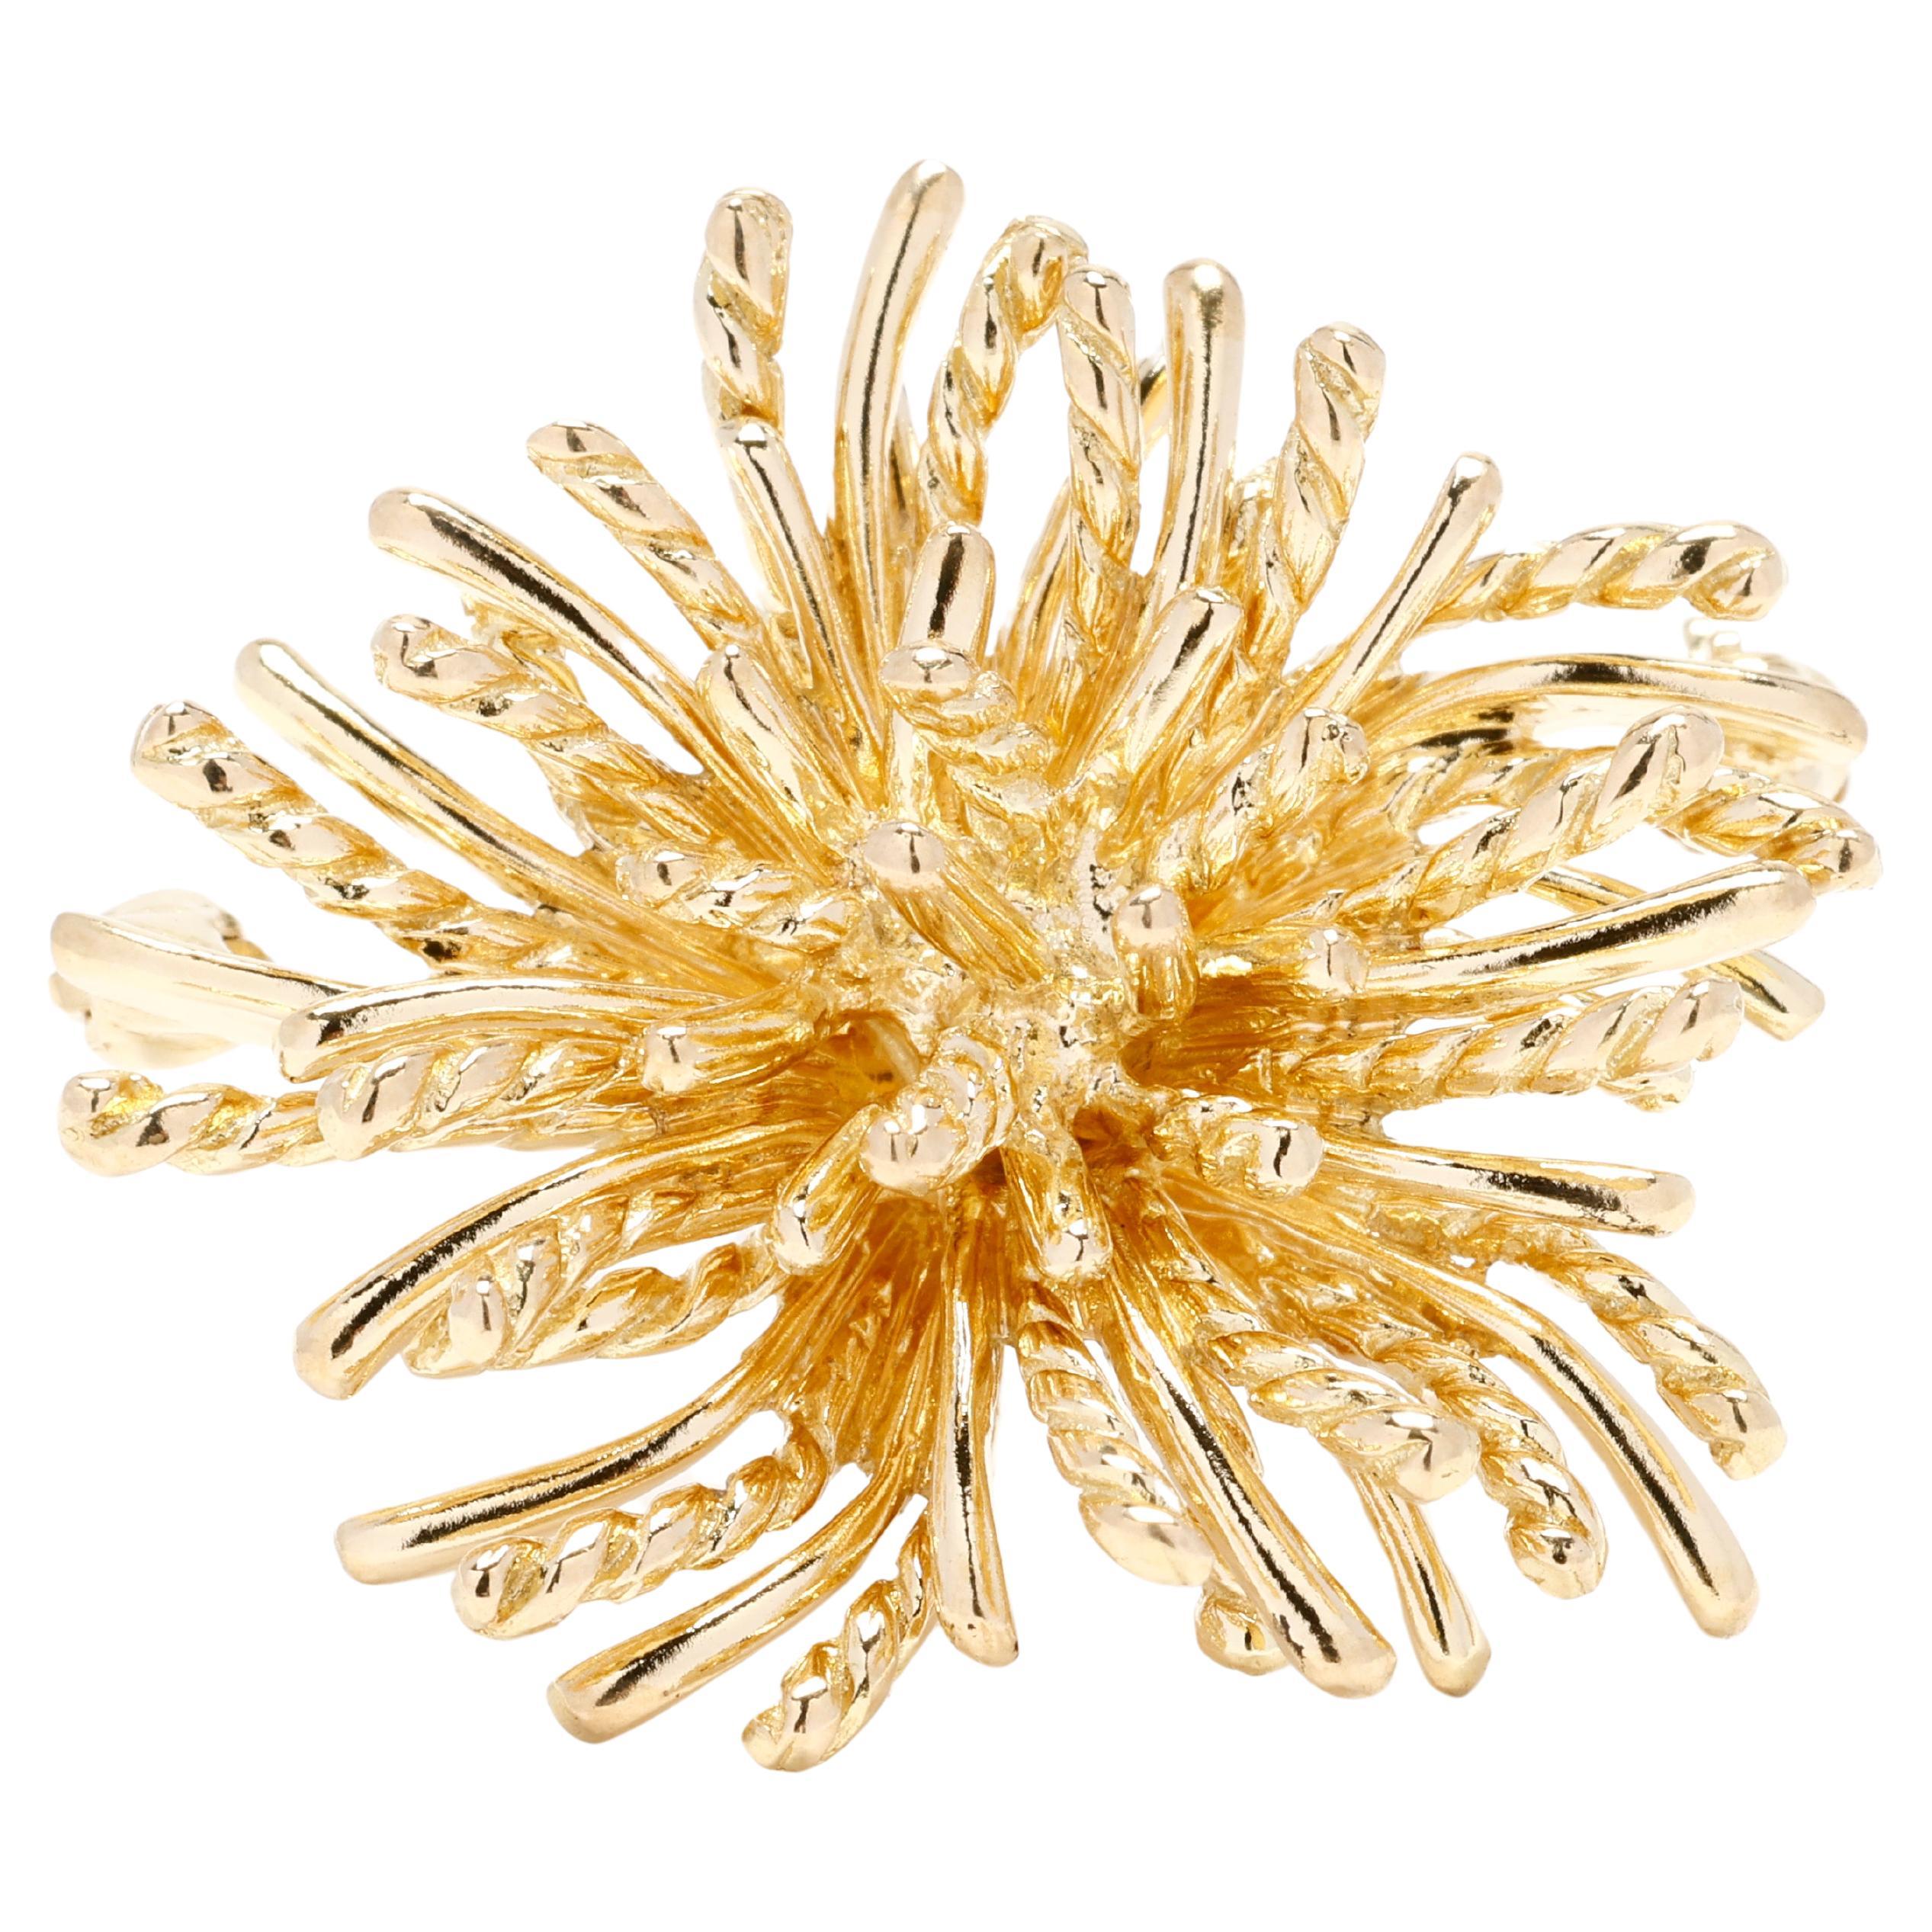 Tiffany & Co. Gold Anemone Brooch, 18k Yellow Gold, Statement Designer Piece  For Sale